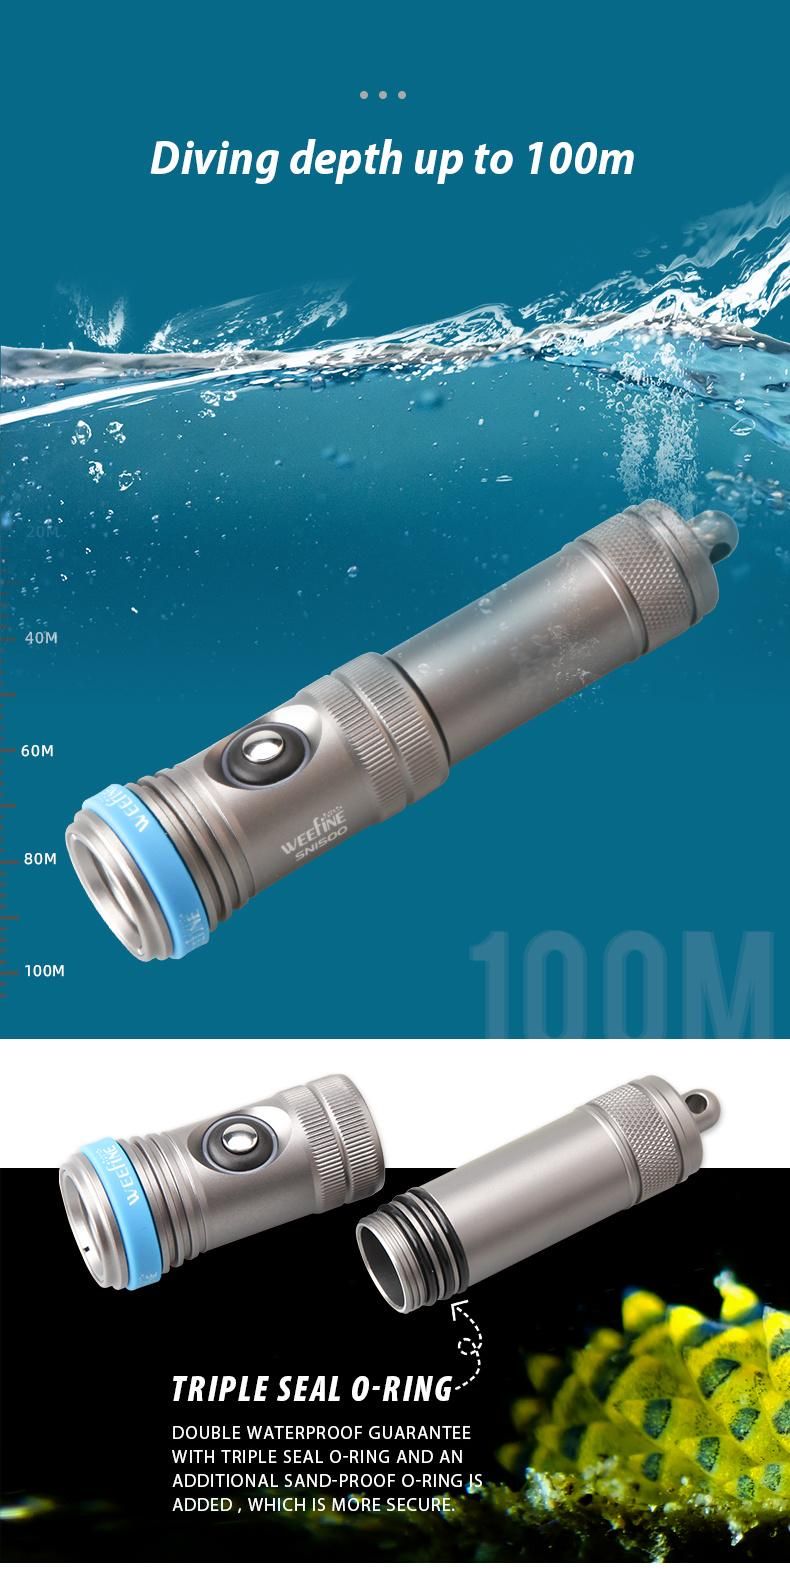 Built-in Automatically Protection Function LED Dive Torch with Triple Seal O-Rings